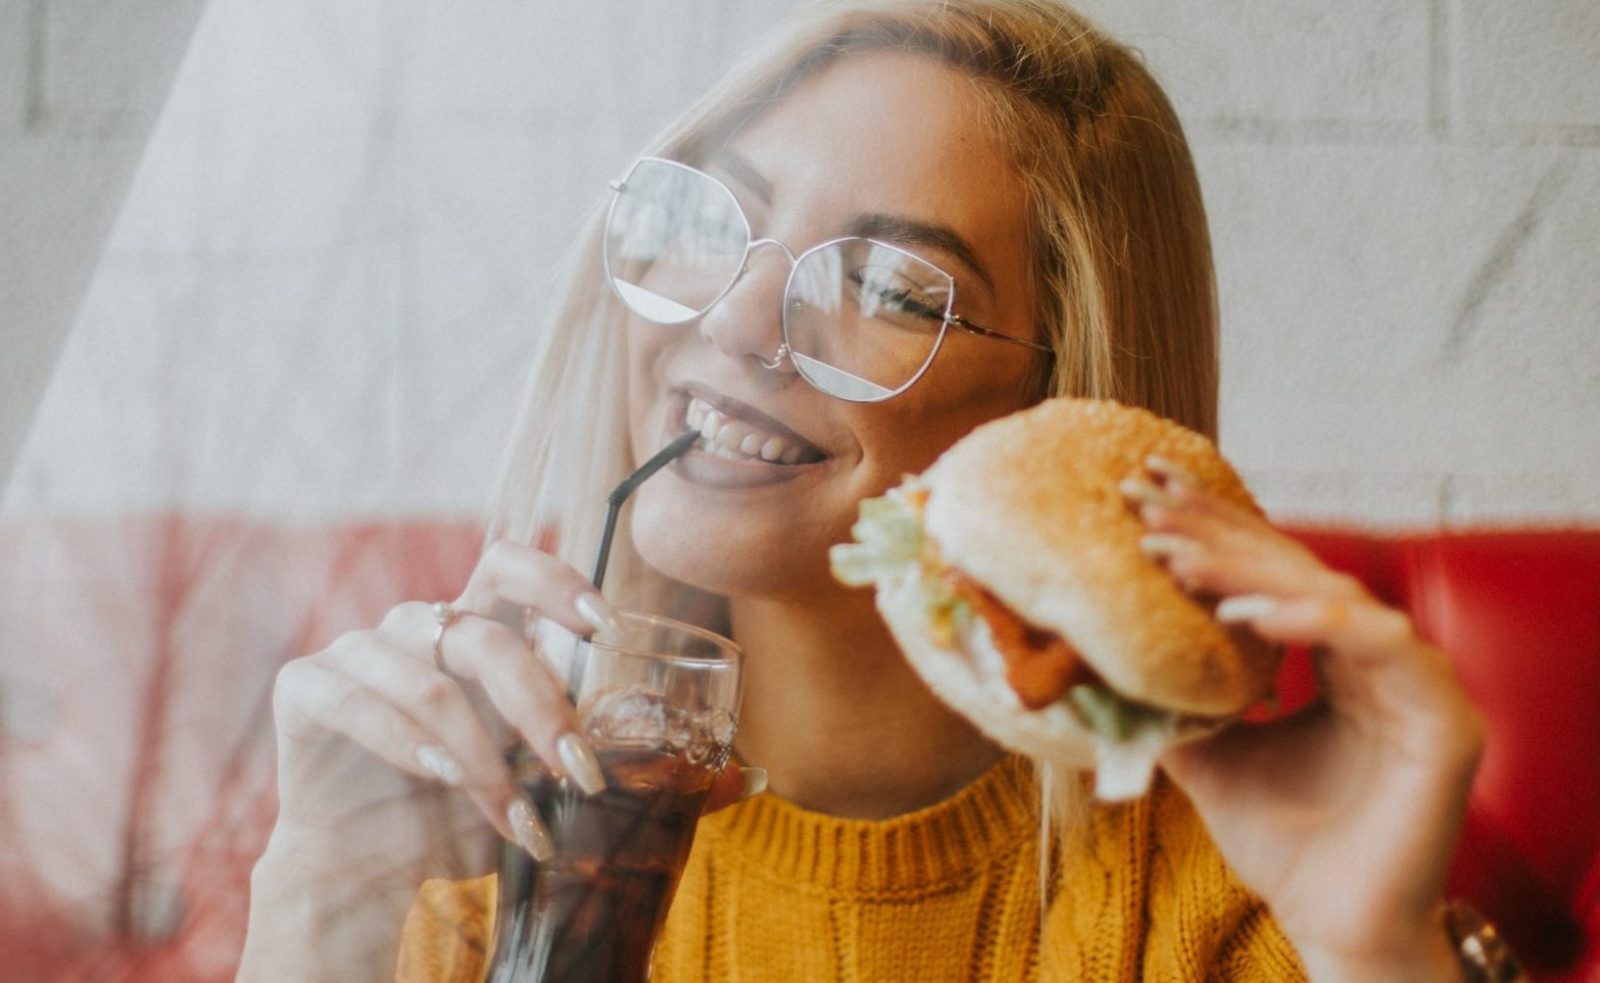 You got: 33! 🍔 Plan a Dinner Party With Only Fast Food and We’ll Reveal Your Exact Age